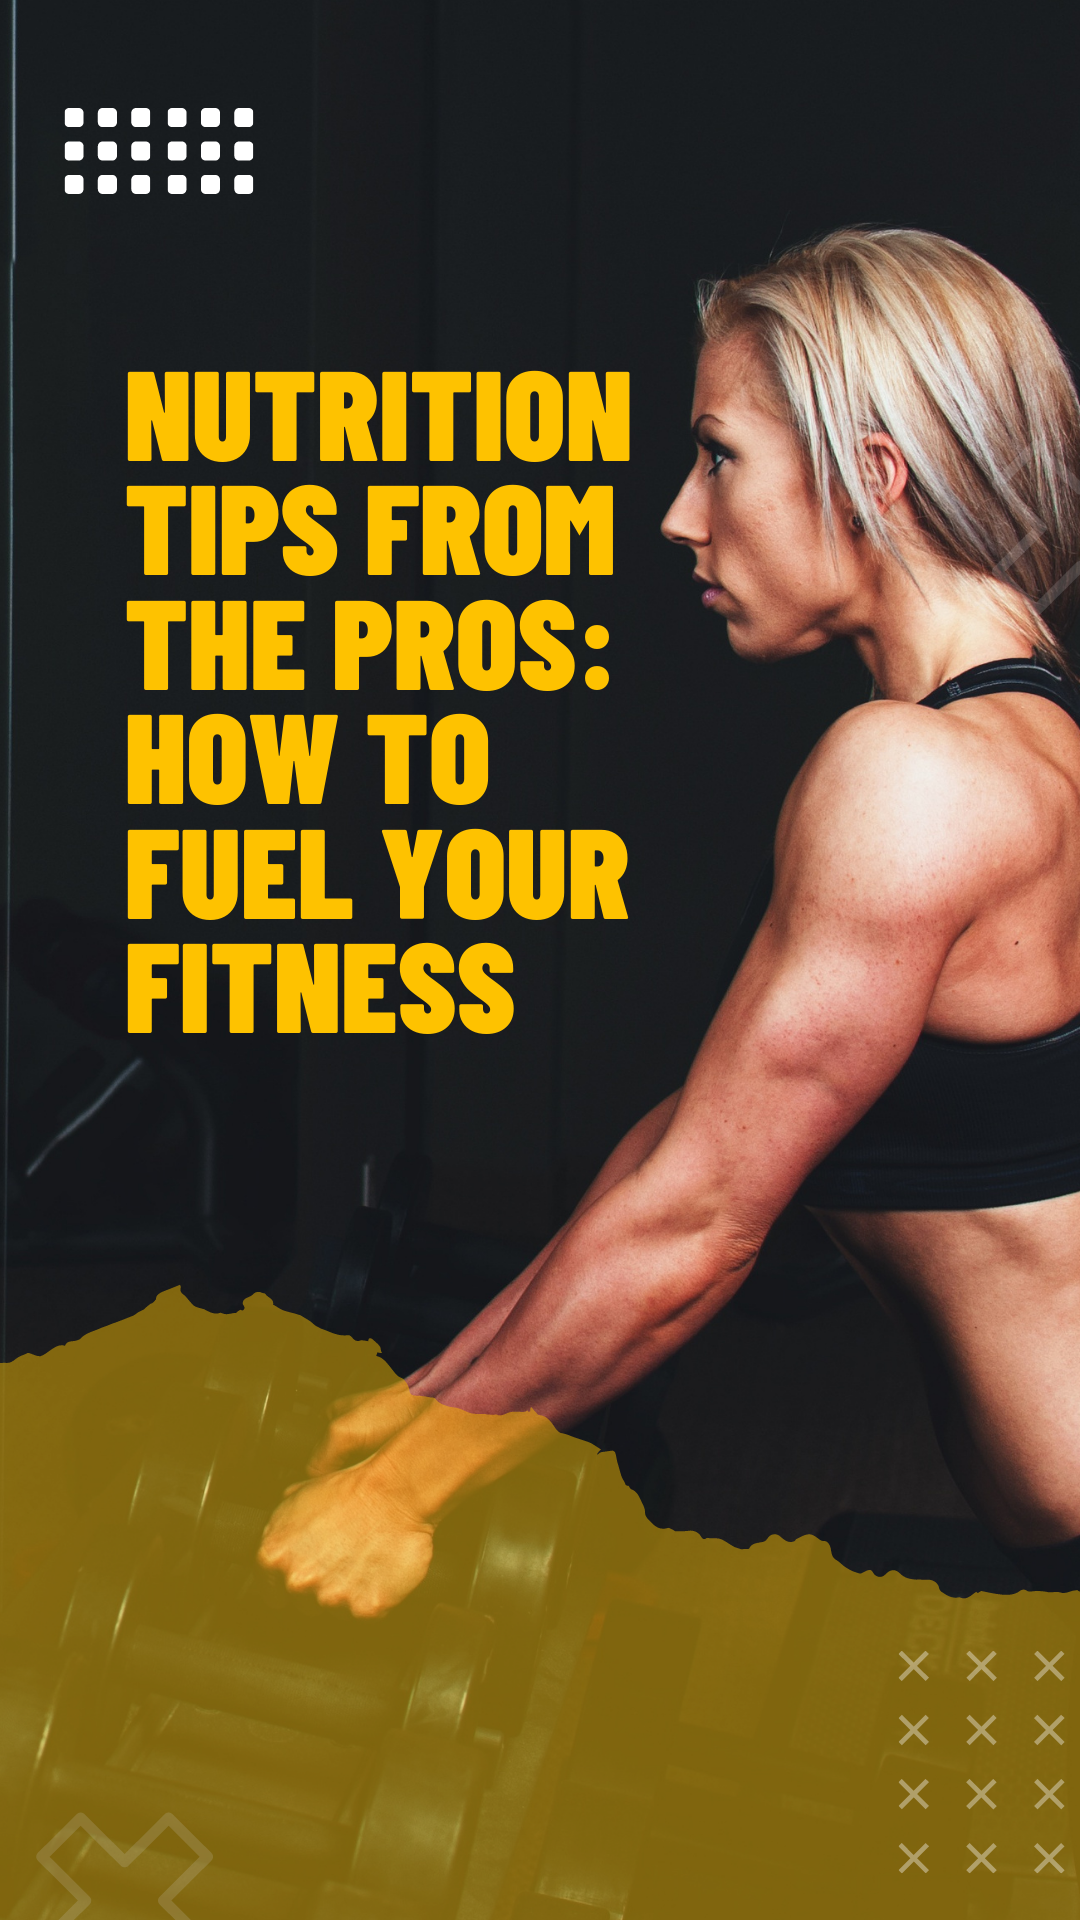 Fitness and nutrition tips